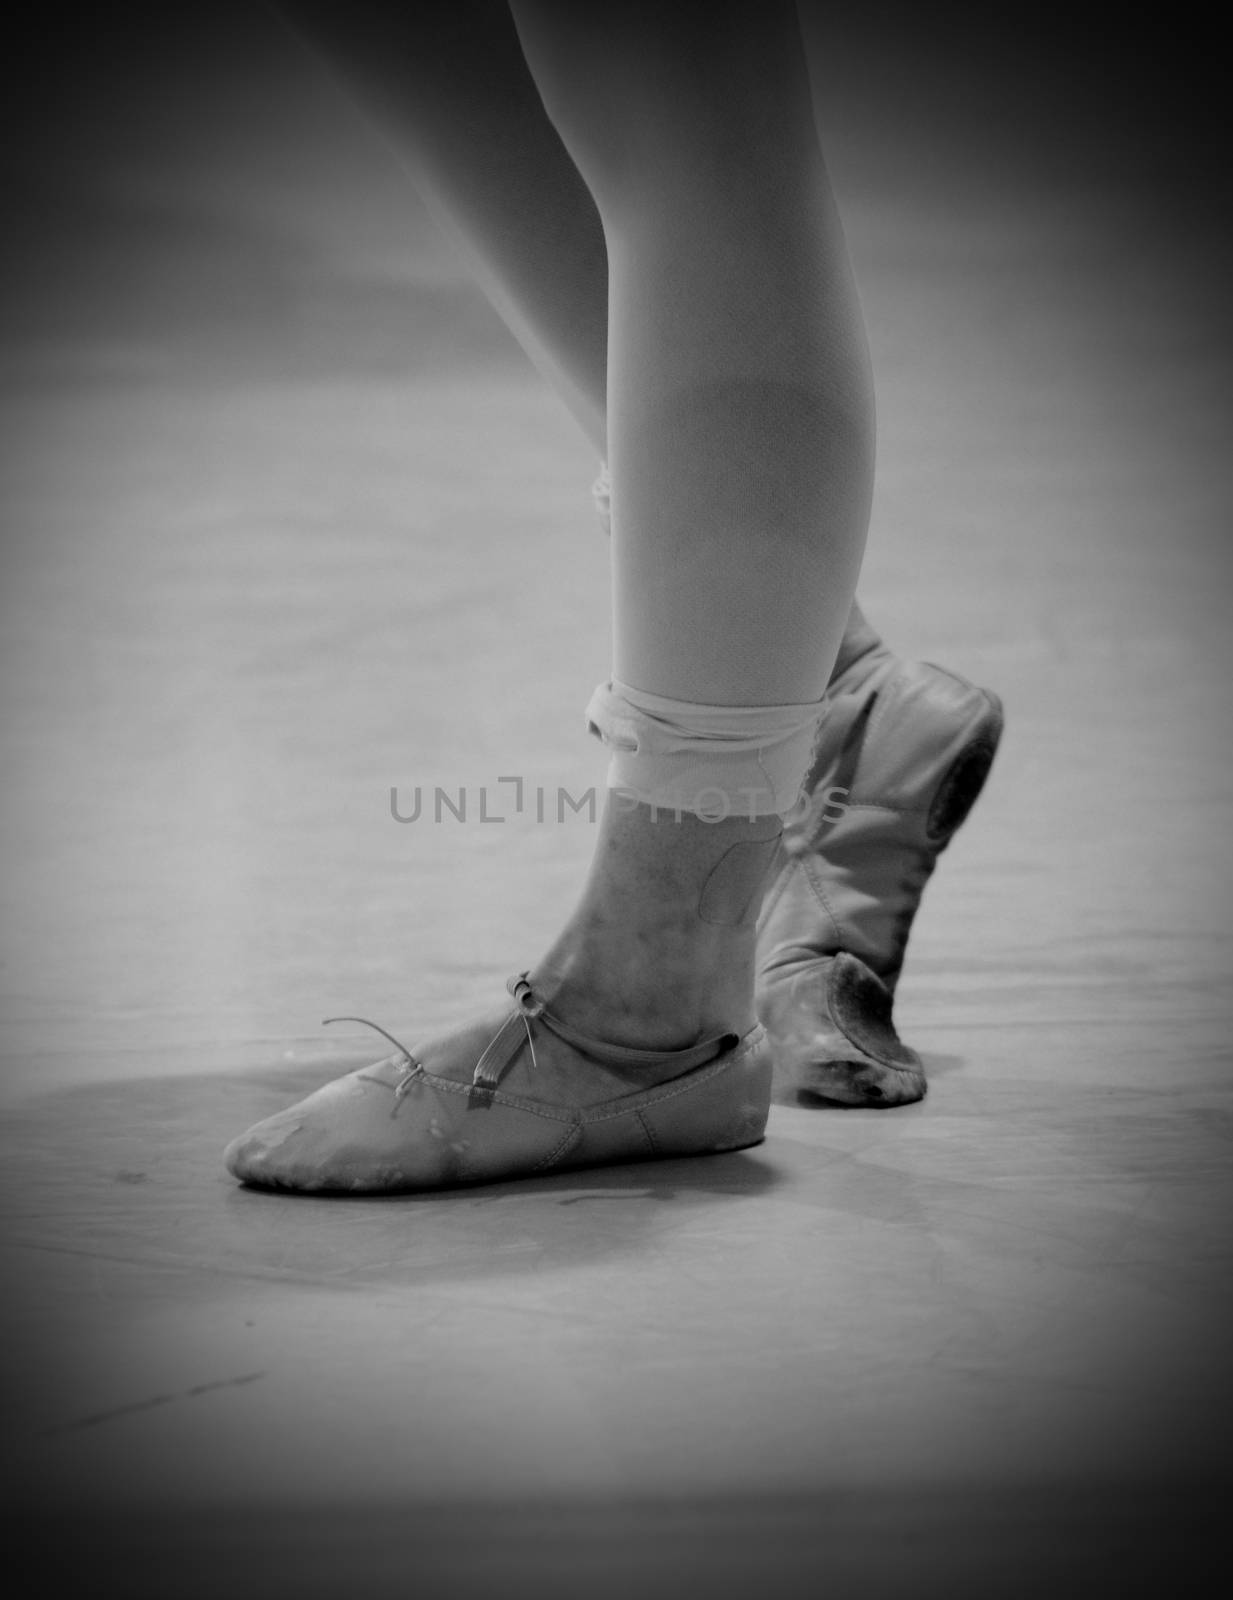 dancer's feet with old shoes and bandage by ftlaudgirl